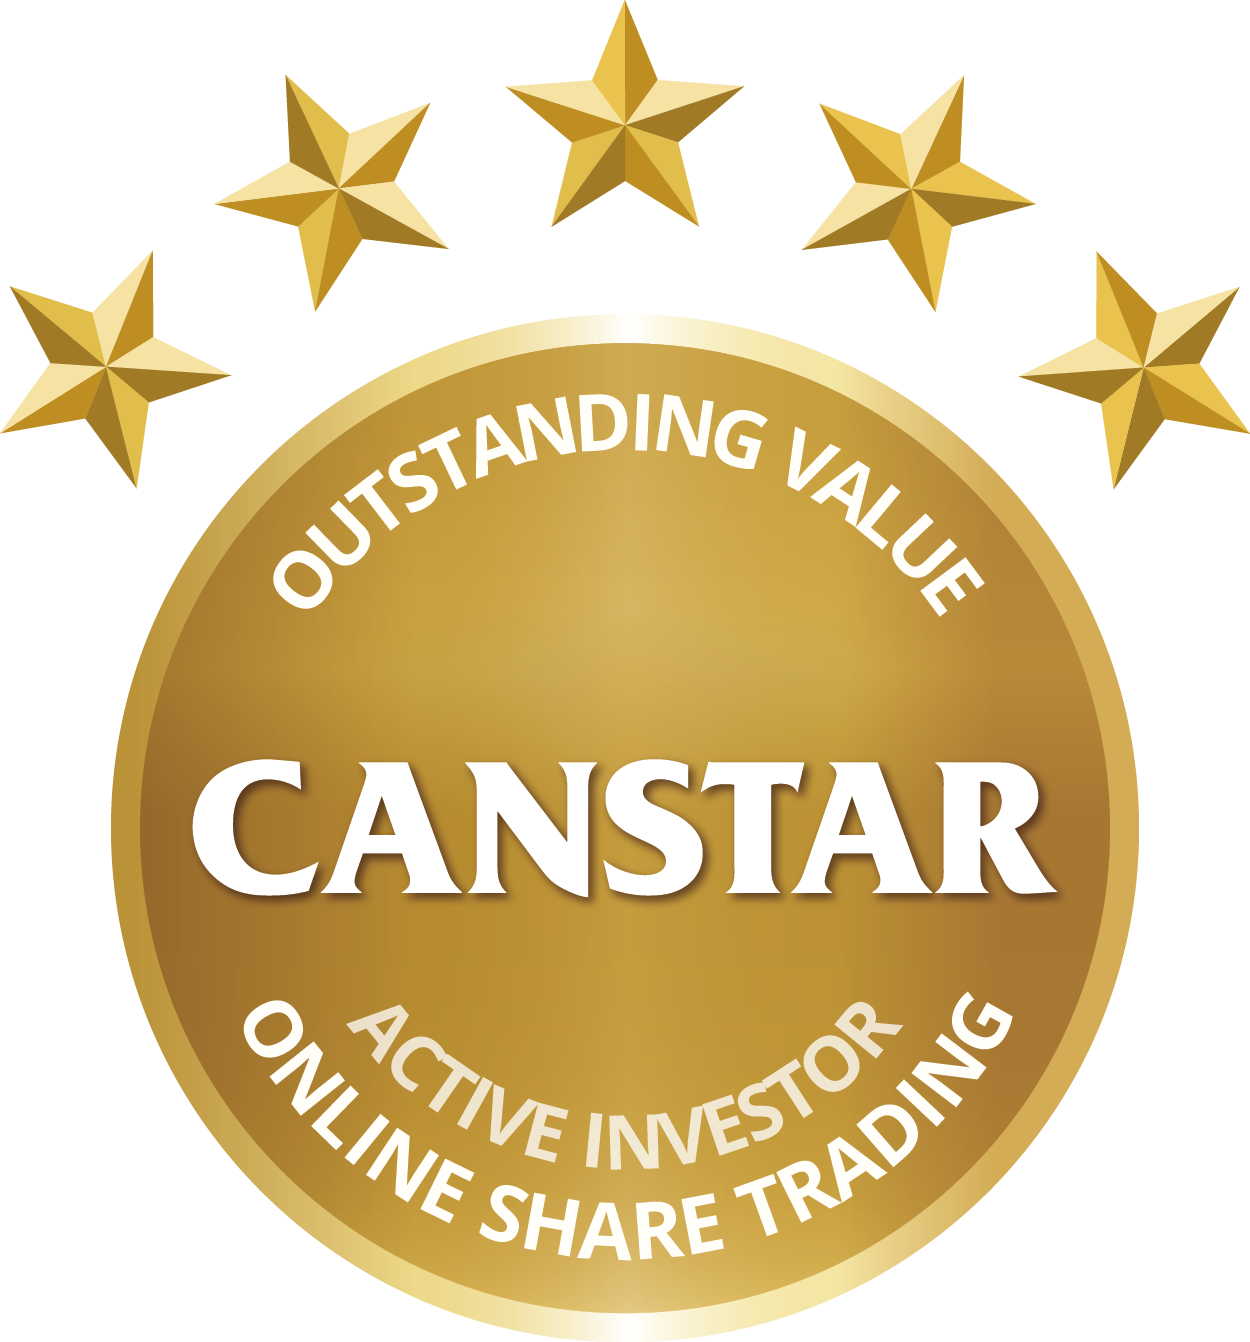 Categoria "Outstanding Value for Active Investors" Canstar